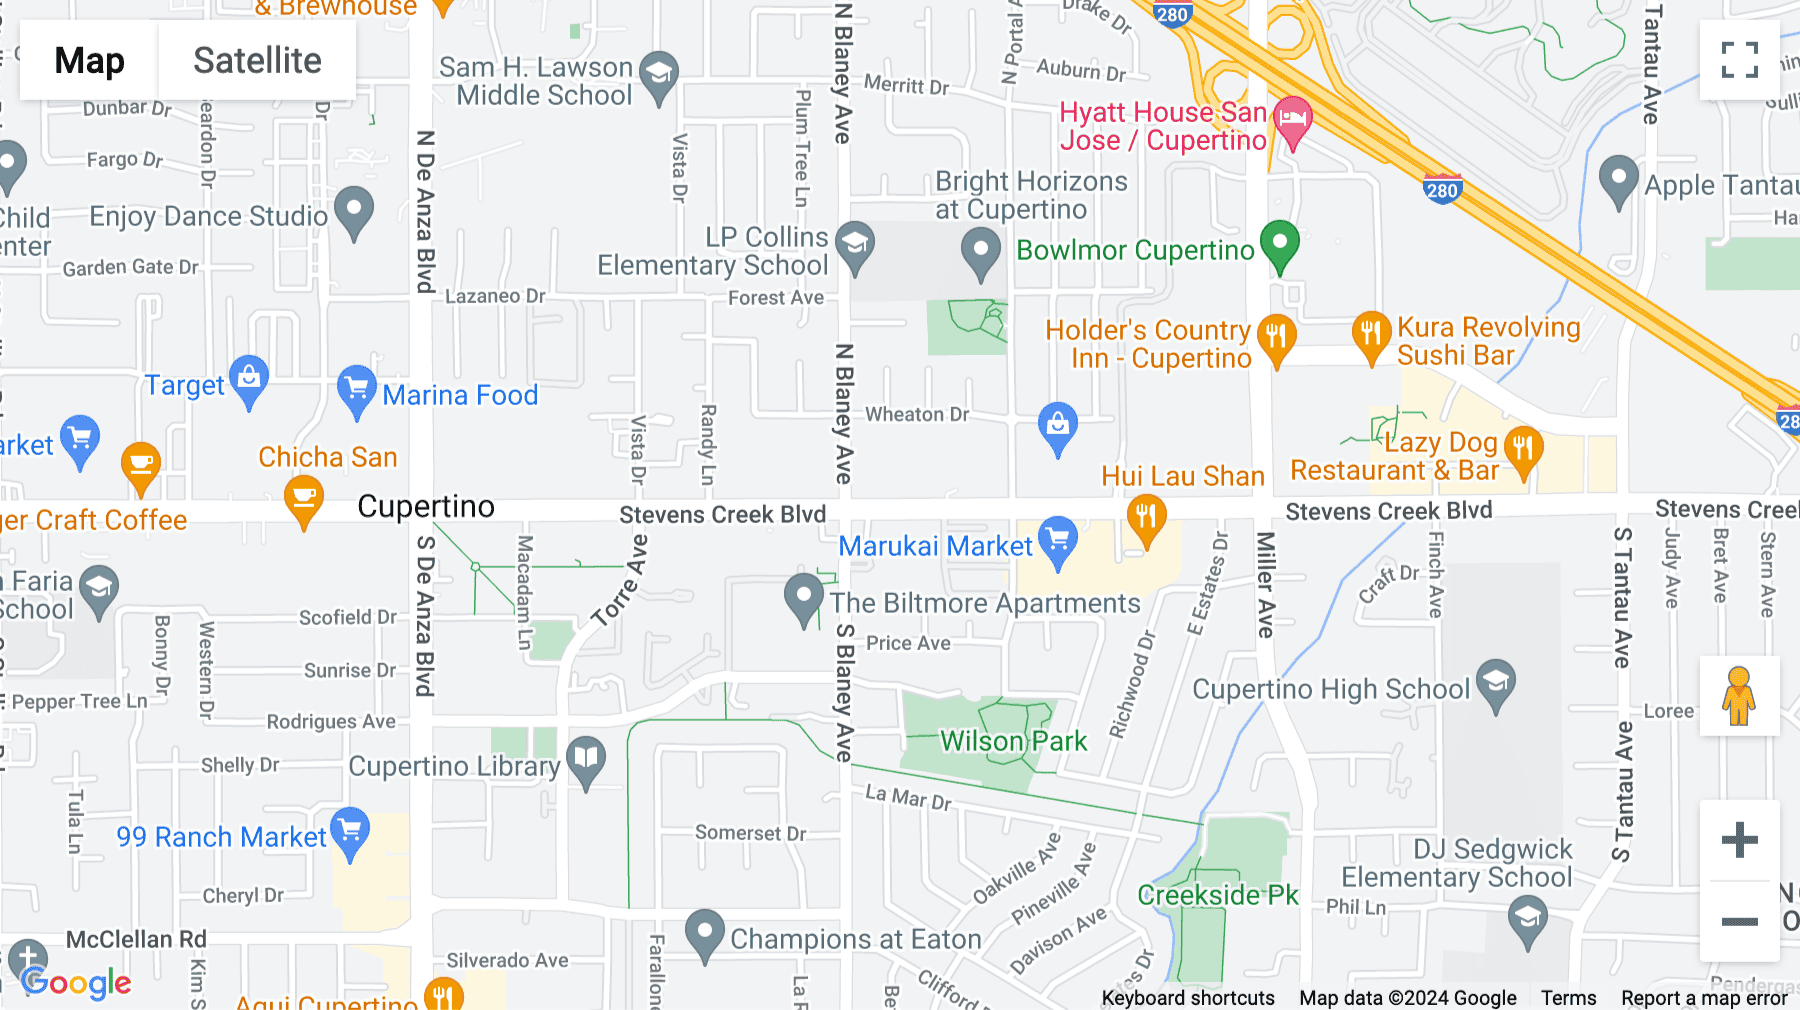 Click for interative map of 19925 Stevens Creek Boulevard, Suite 100, Cupertino